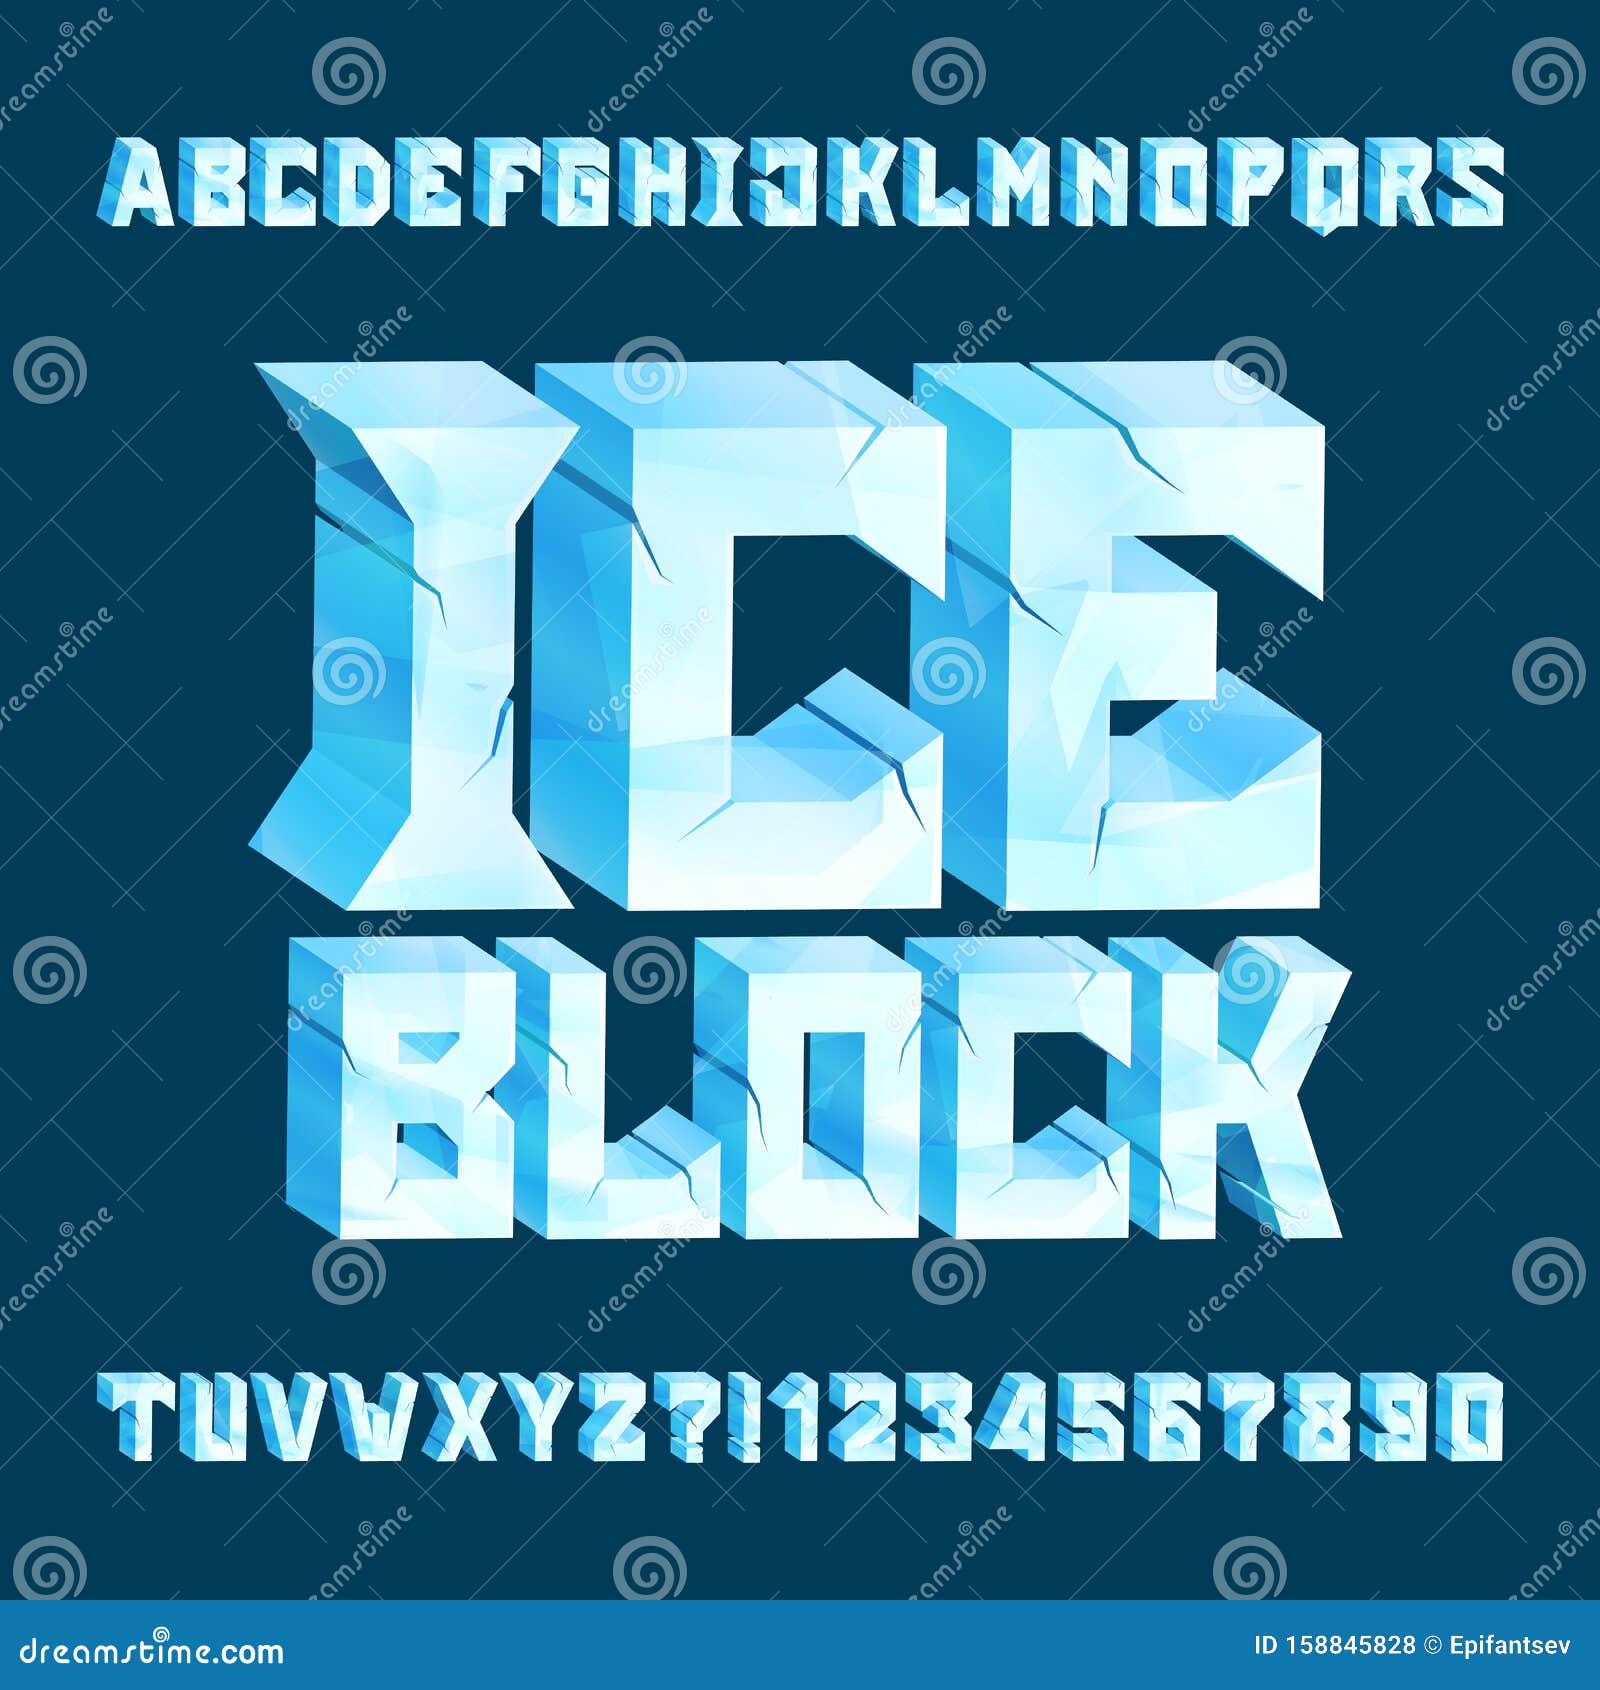 https://thumbs.dreamstime.com/z/ice-block-alphabet-font-d-cracked-letters-numbers-stock-vector-typeface-your-typography-design-158845828.jpg